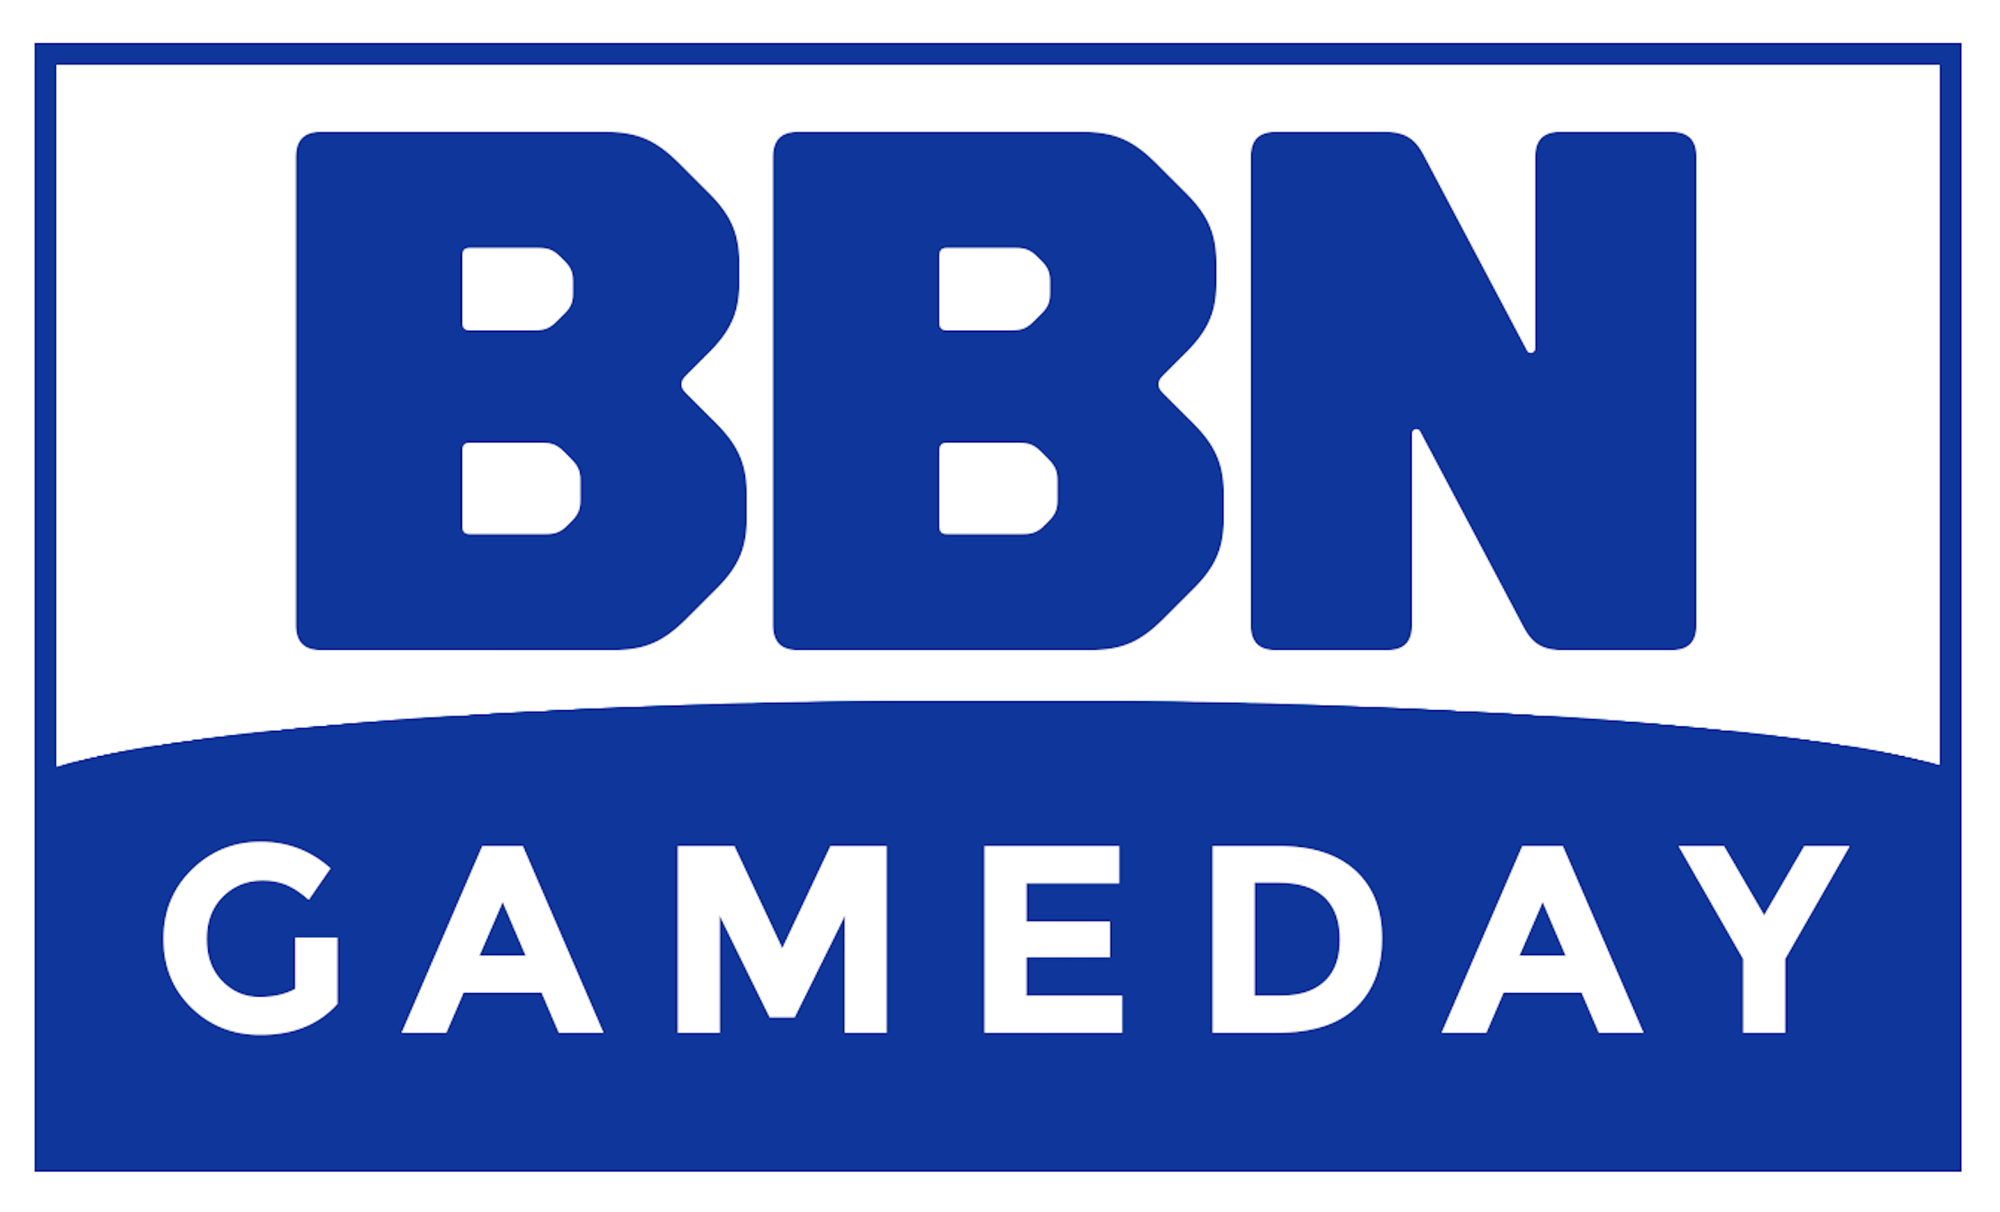 BBN Gameday February 12nd 2022